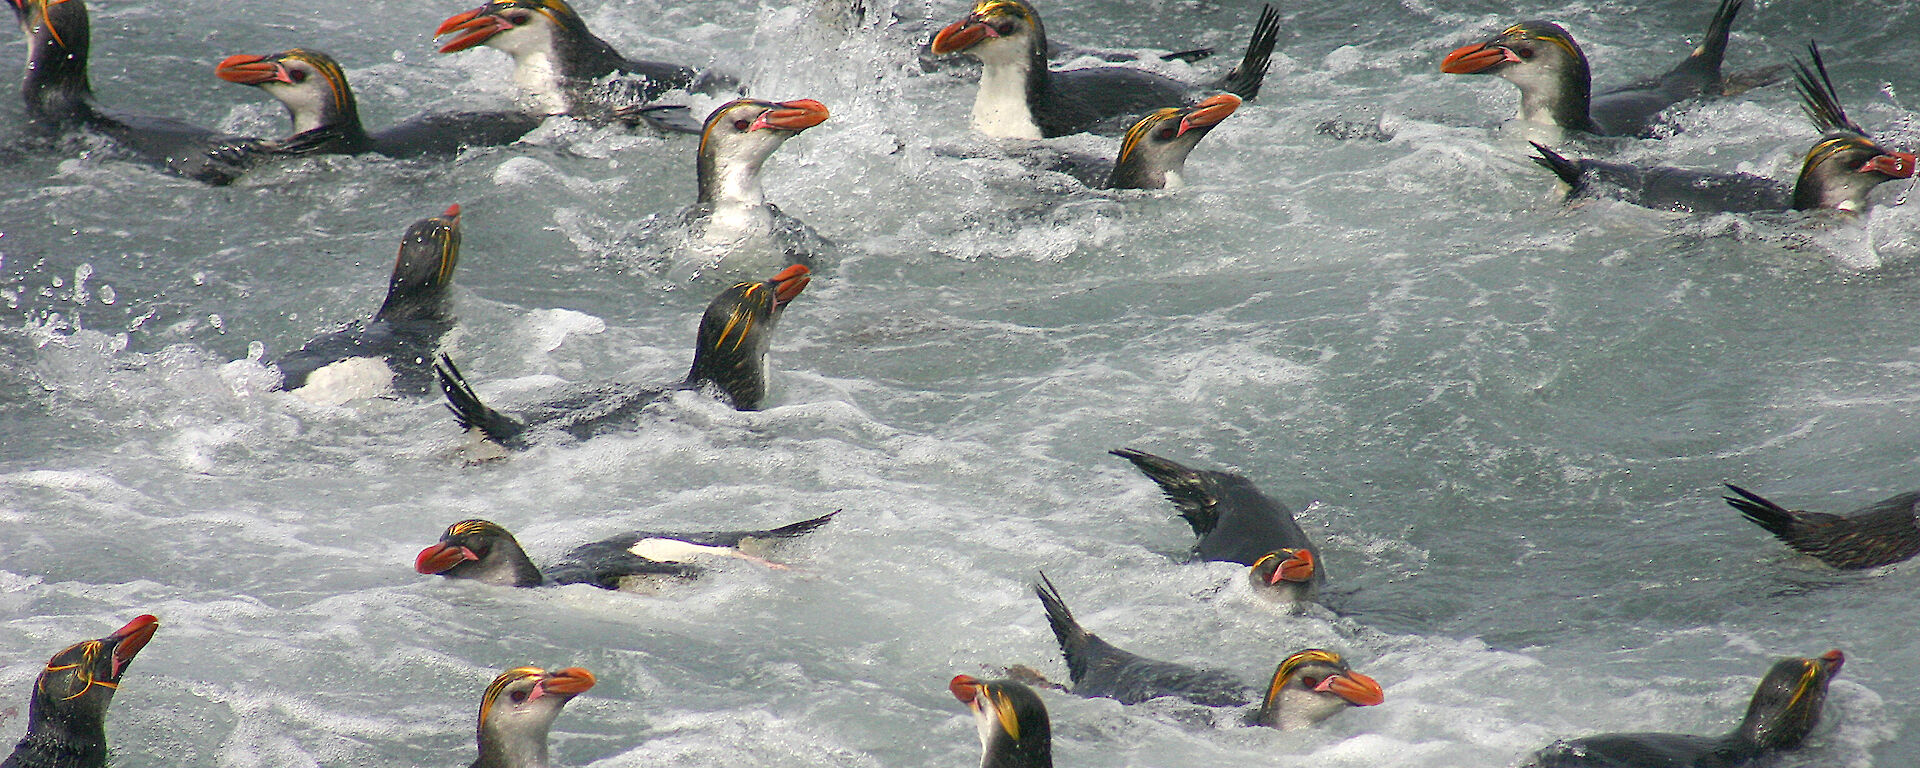 A group of about 20 royal penguins swimming in the water